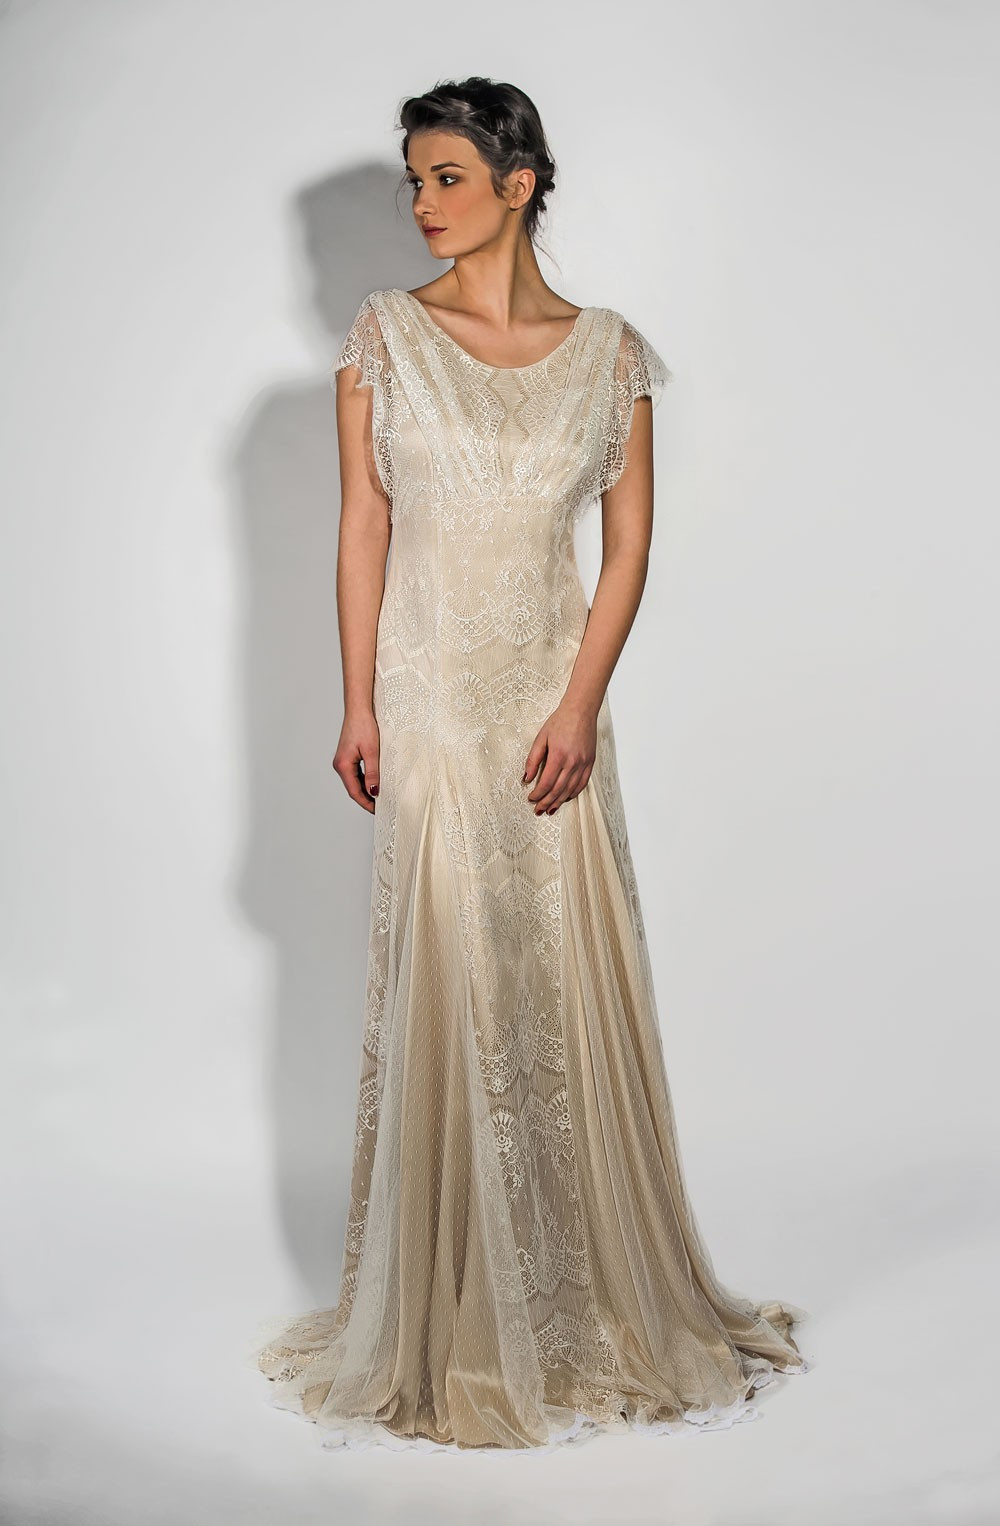 1920s Inspired Wedding Dresses
 1920s Wedding Dresses hitched